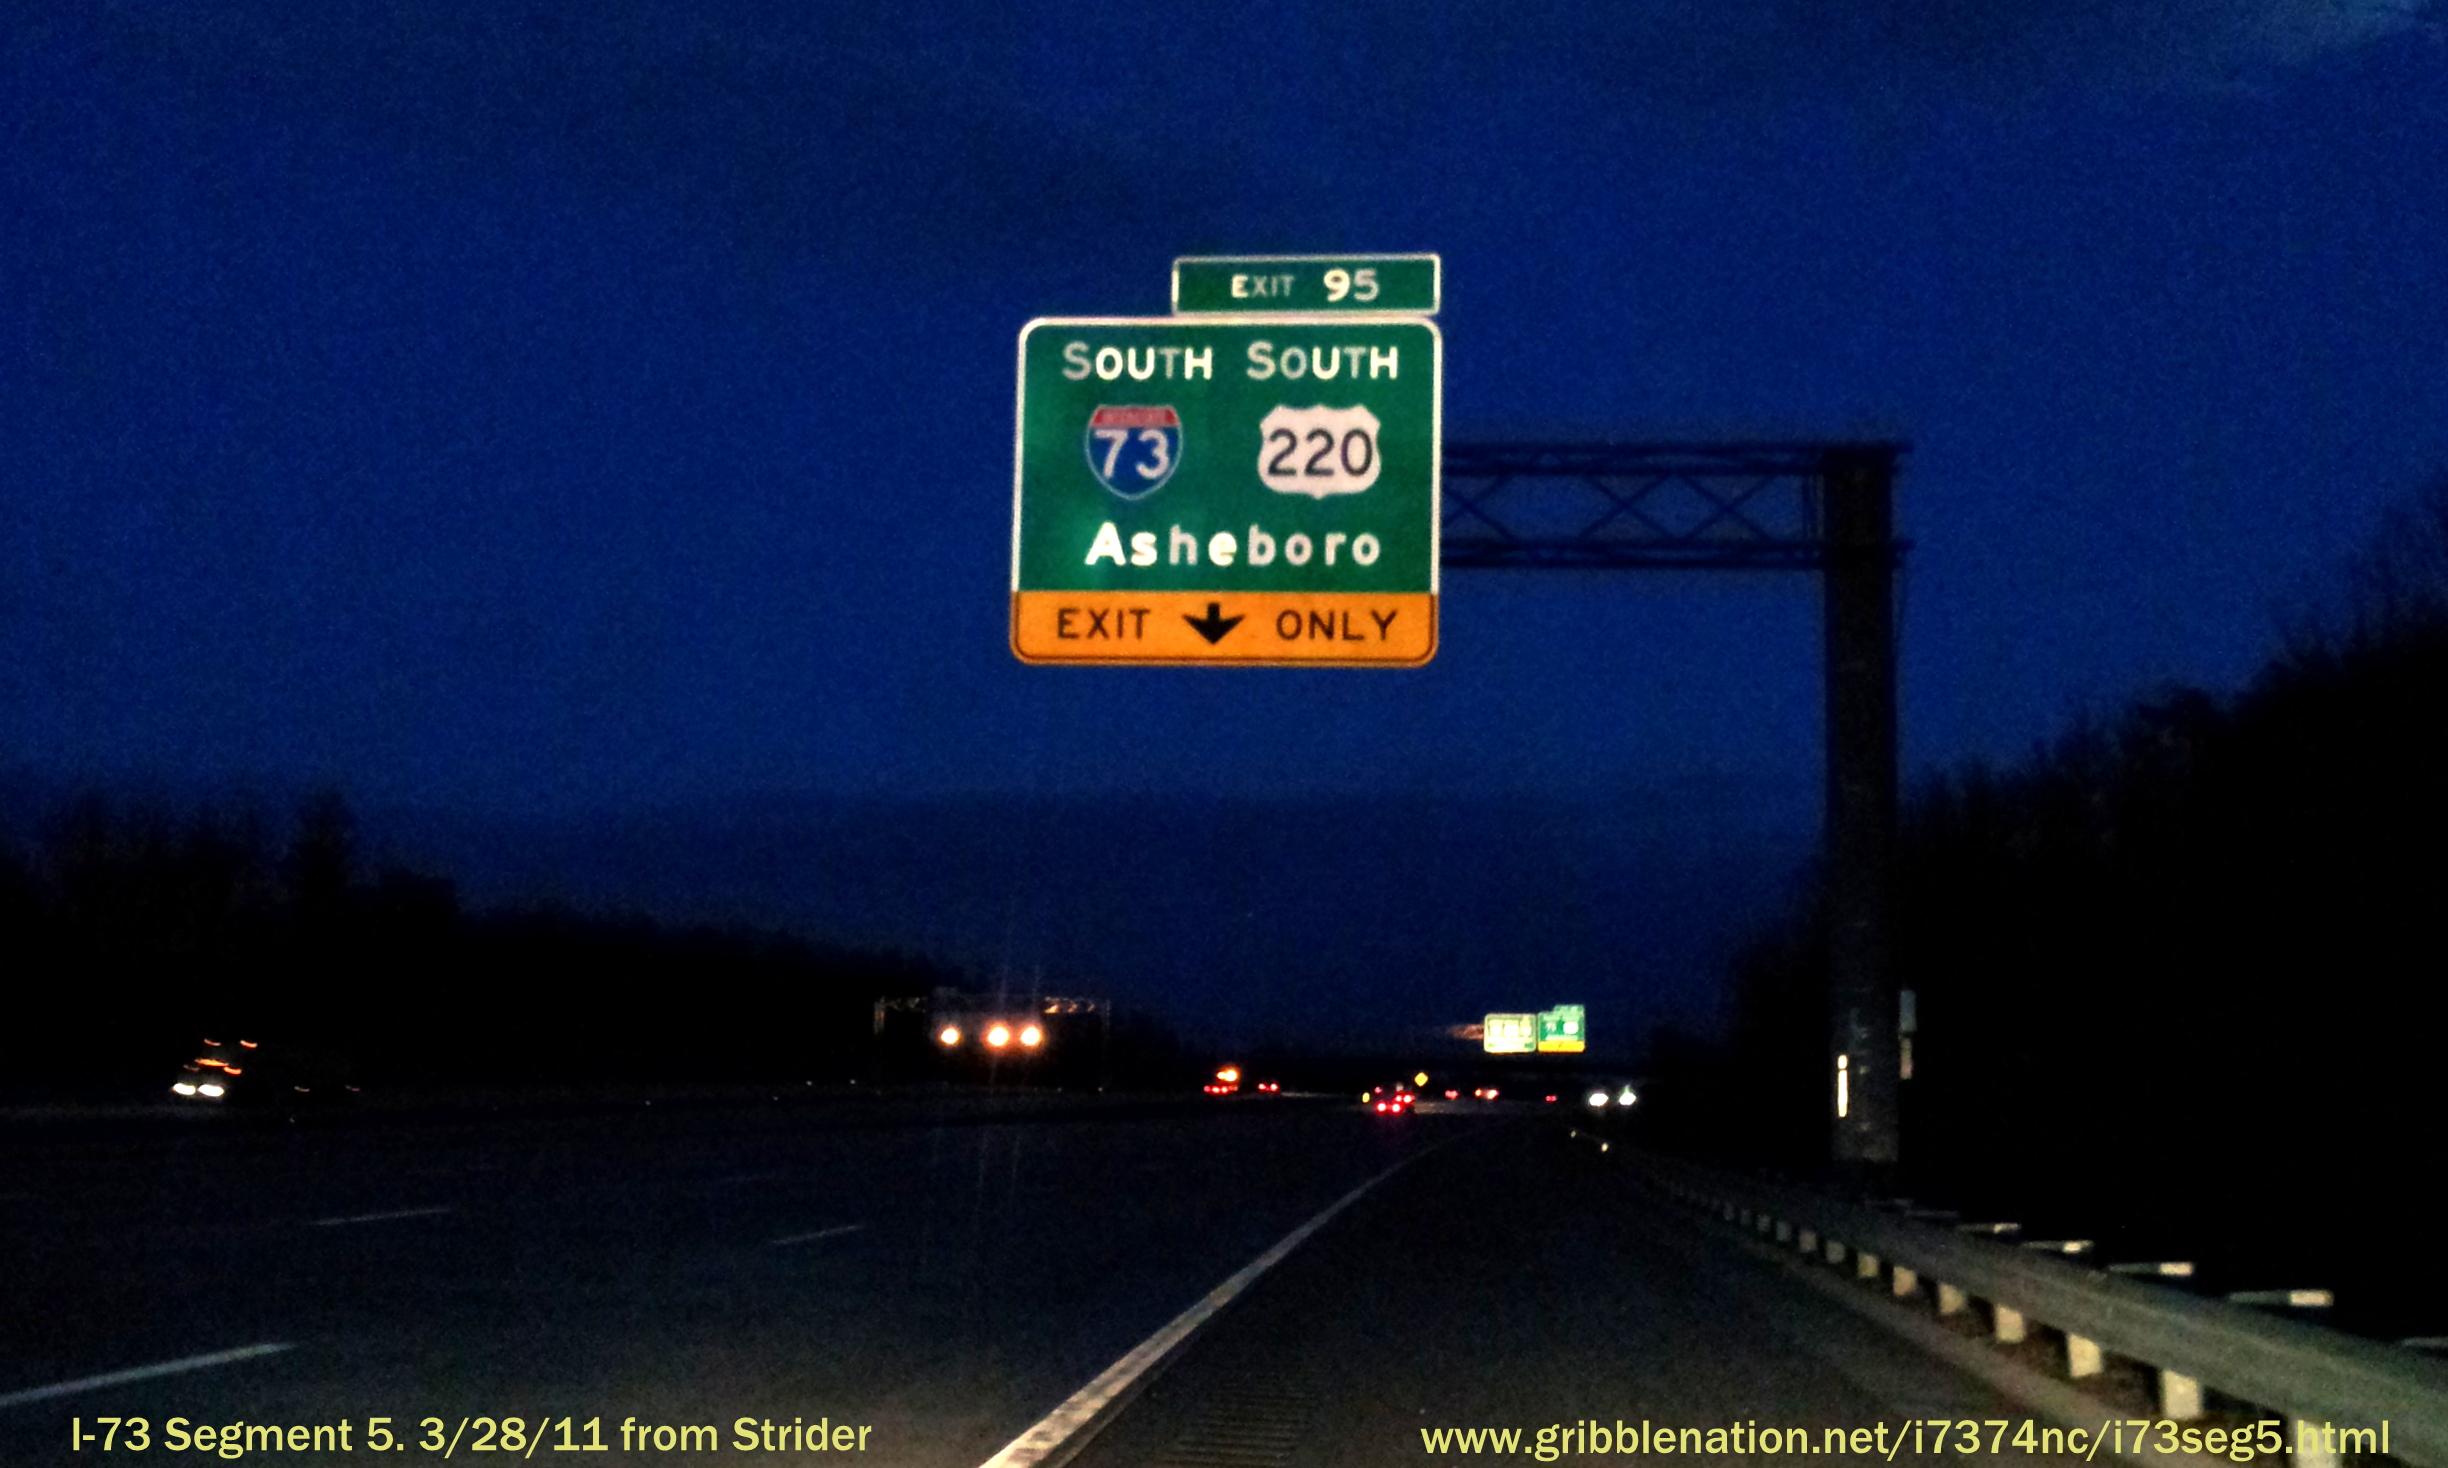 Photo of new I-73 signage for Exit 95 along Greensboro Loop approaching 
junction with I-85 in March 2013, Courtesy of Strider